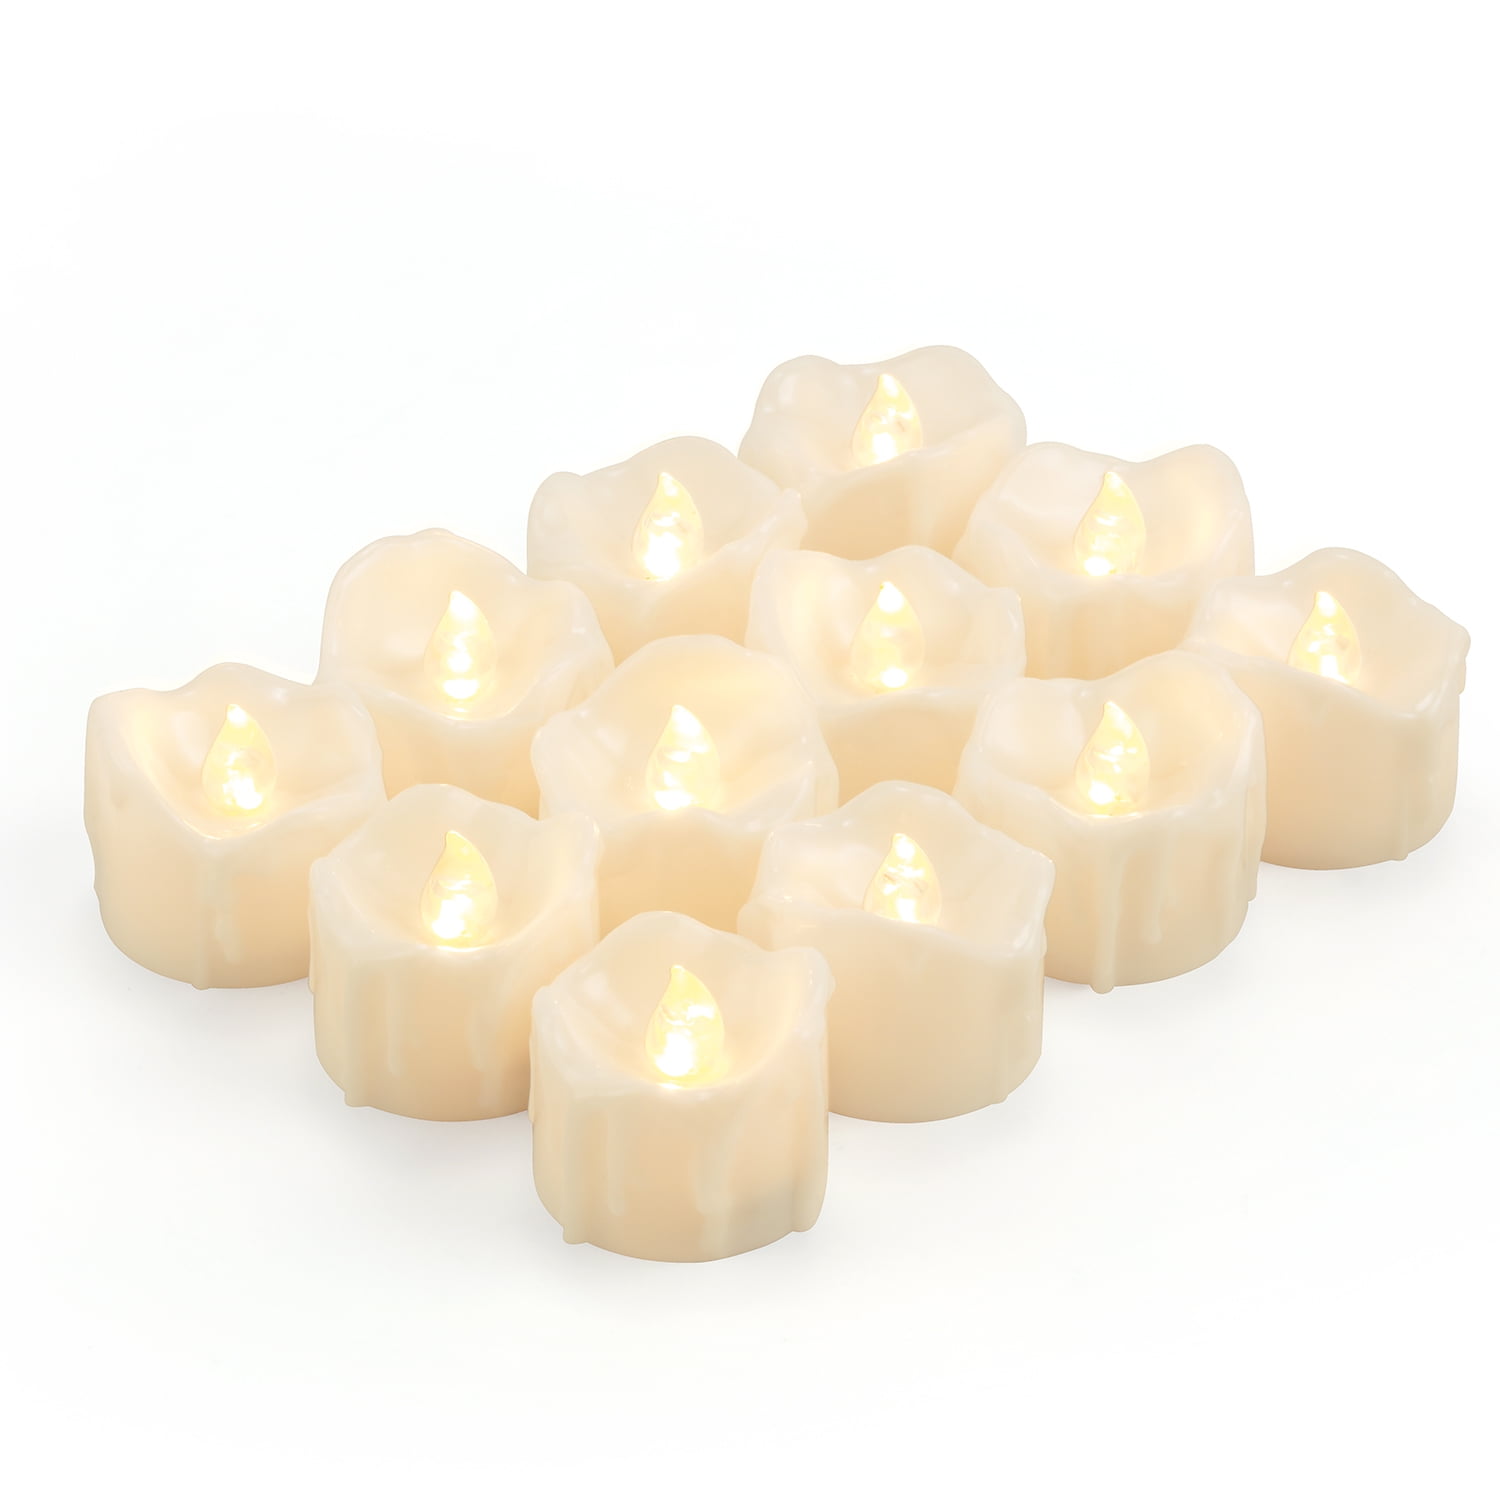 12PCS Flickering Flameless Candles Battery Operated Led Tea Lights Warm White Warm White Light Wax Dripped Tealights for Halloween Christmas Window Indoor Decorations